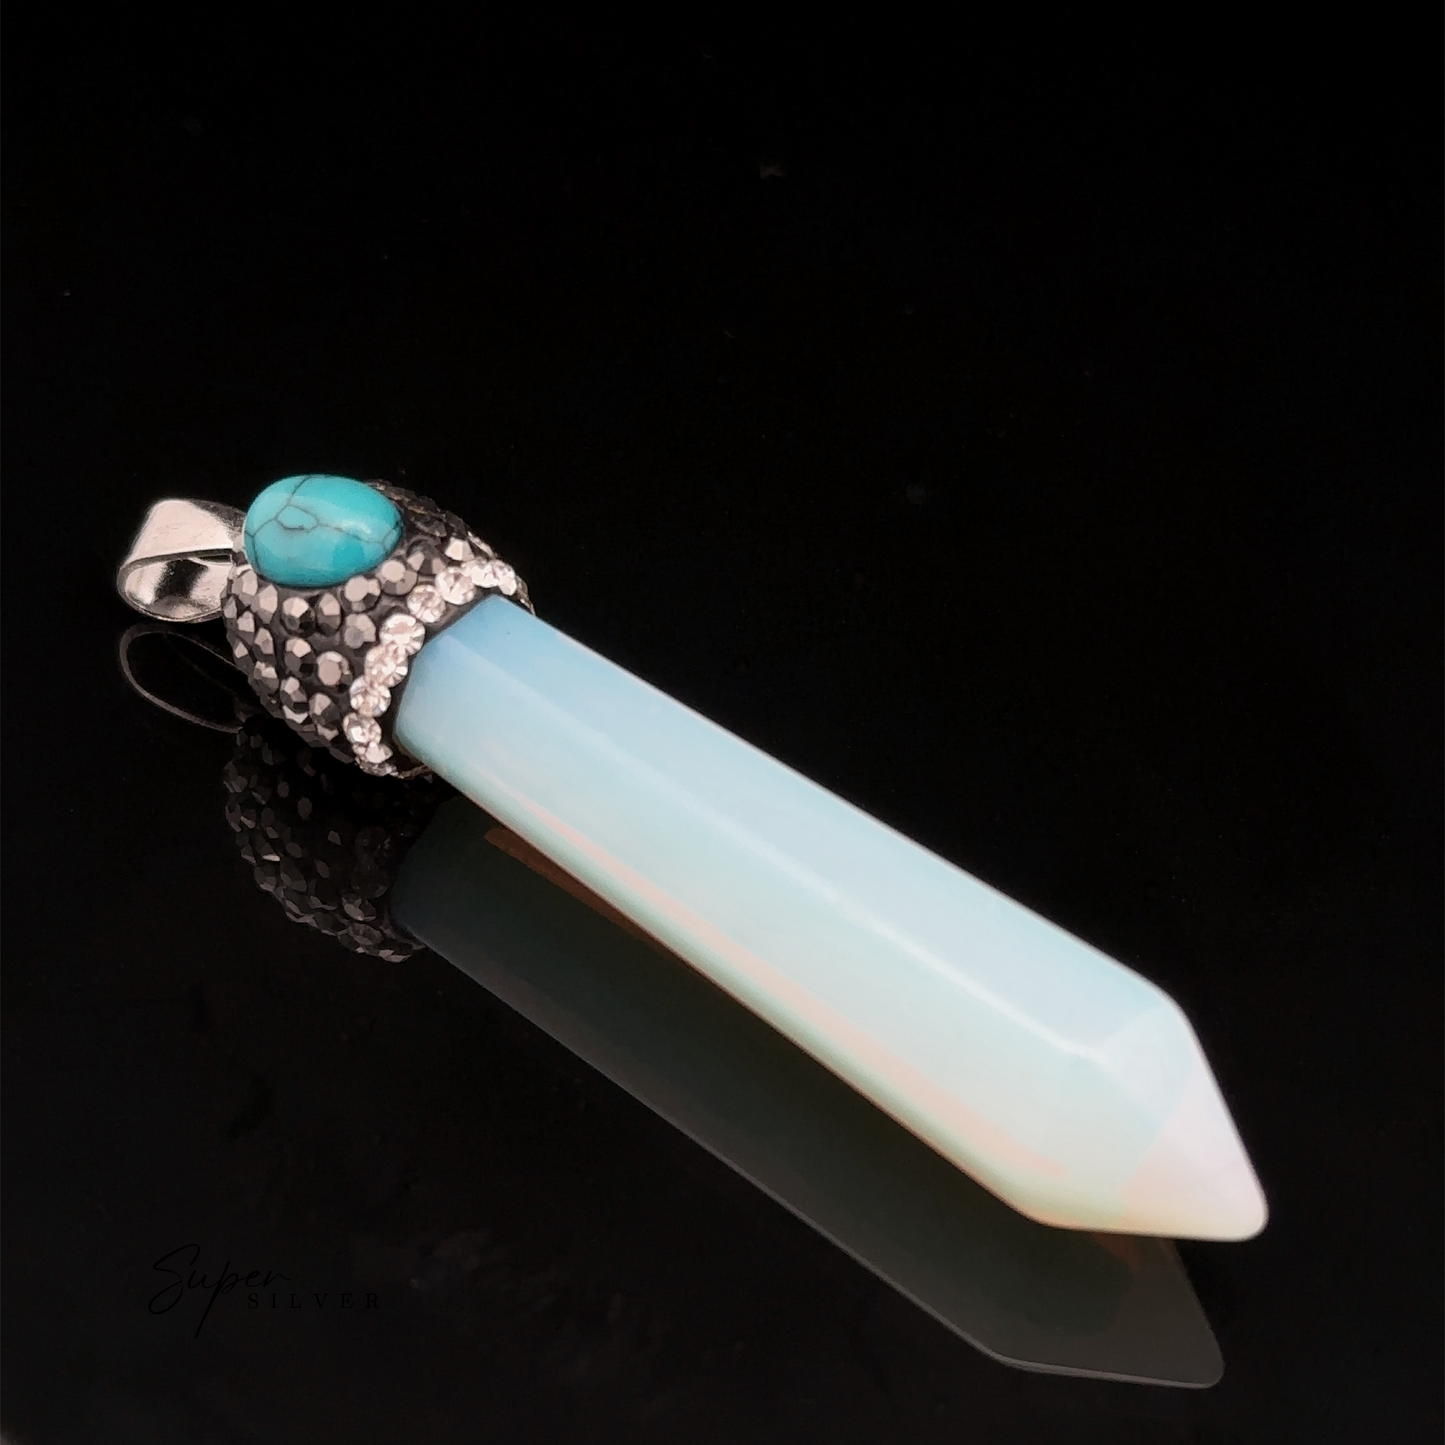 
                  
                    An Stone Obelisk Pendant featuring a pointed white and blue gemstone, topped with a decorative silver cap and a small turquoise stone, rests elegantly on a black background.

                  
                